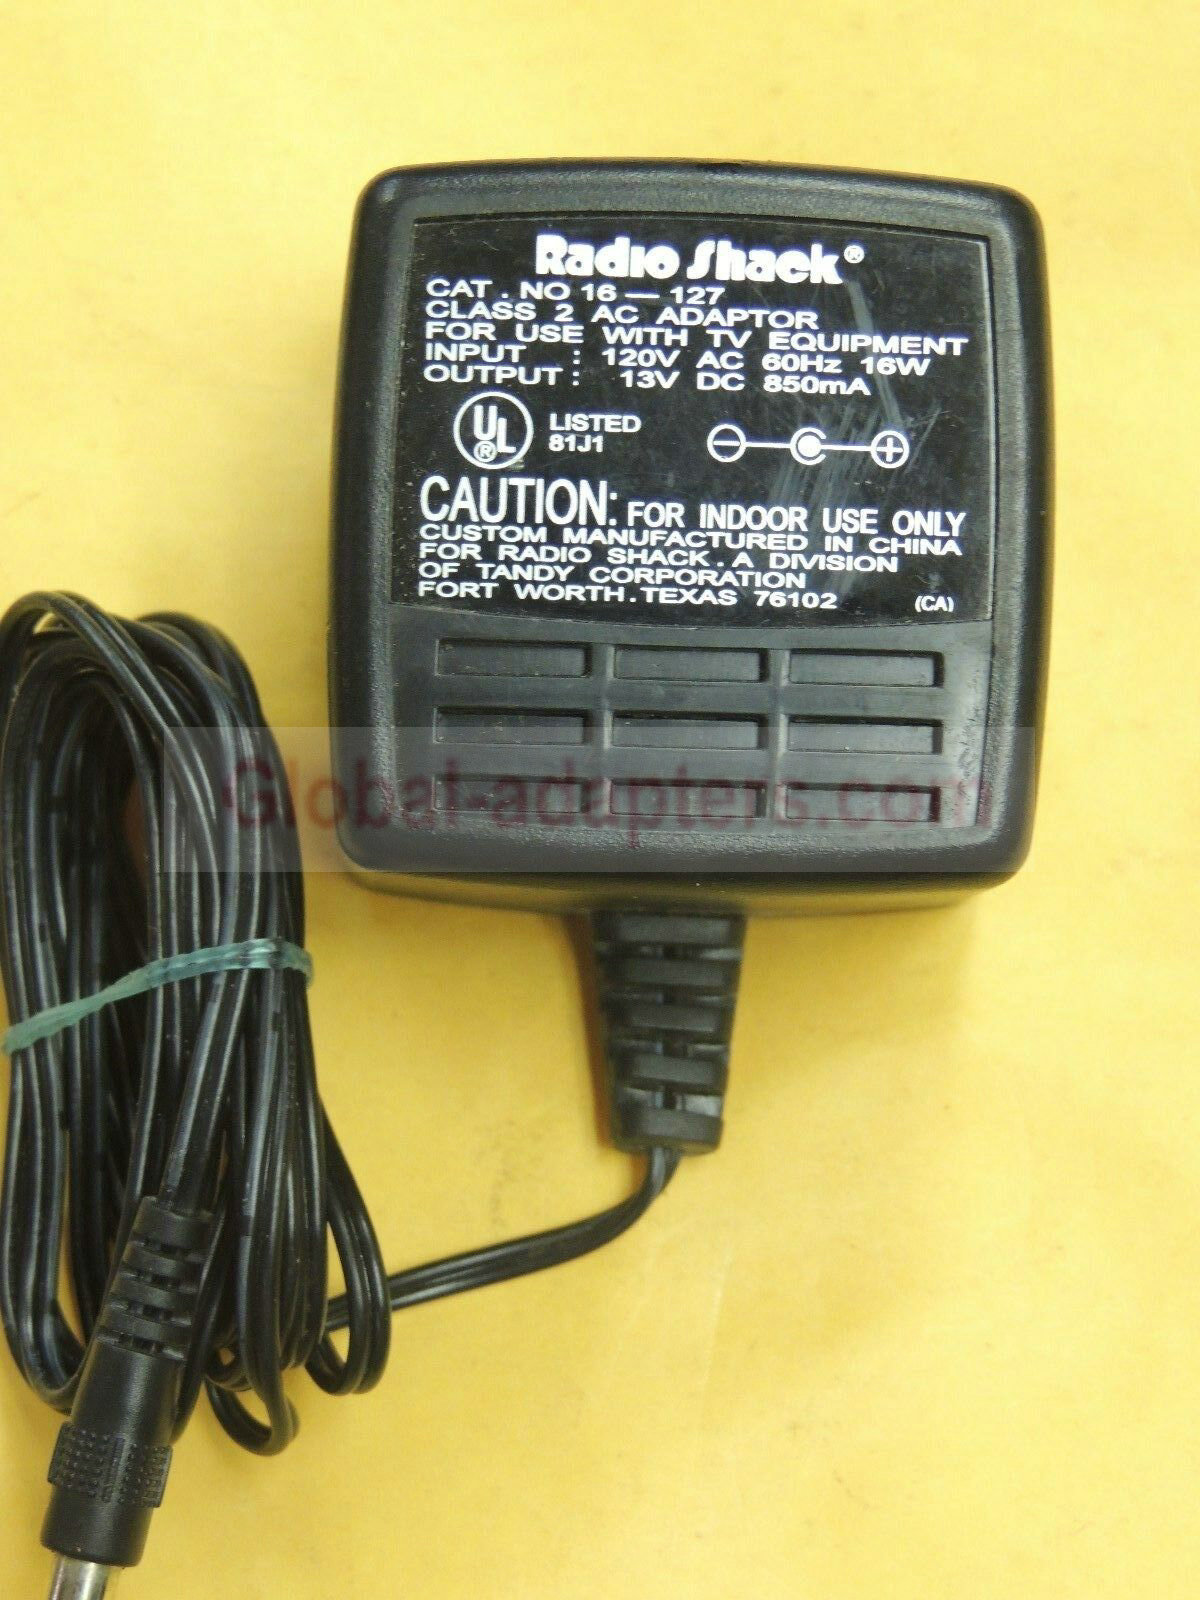 New DC13V 850mA RadioShack 16-127 Power Supply AC ADAPTER with 5.5mm x 2.1mm Barrel Connector